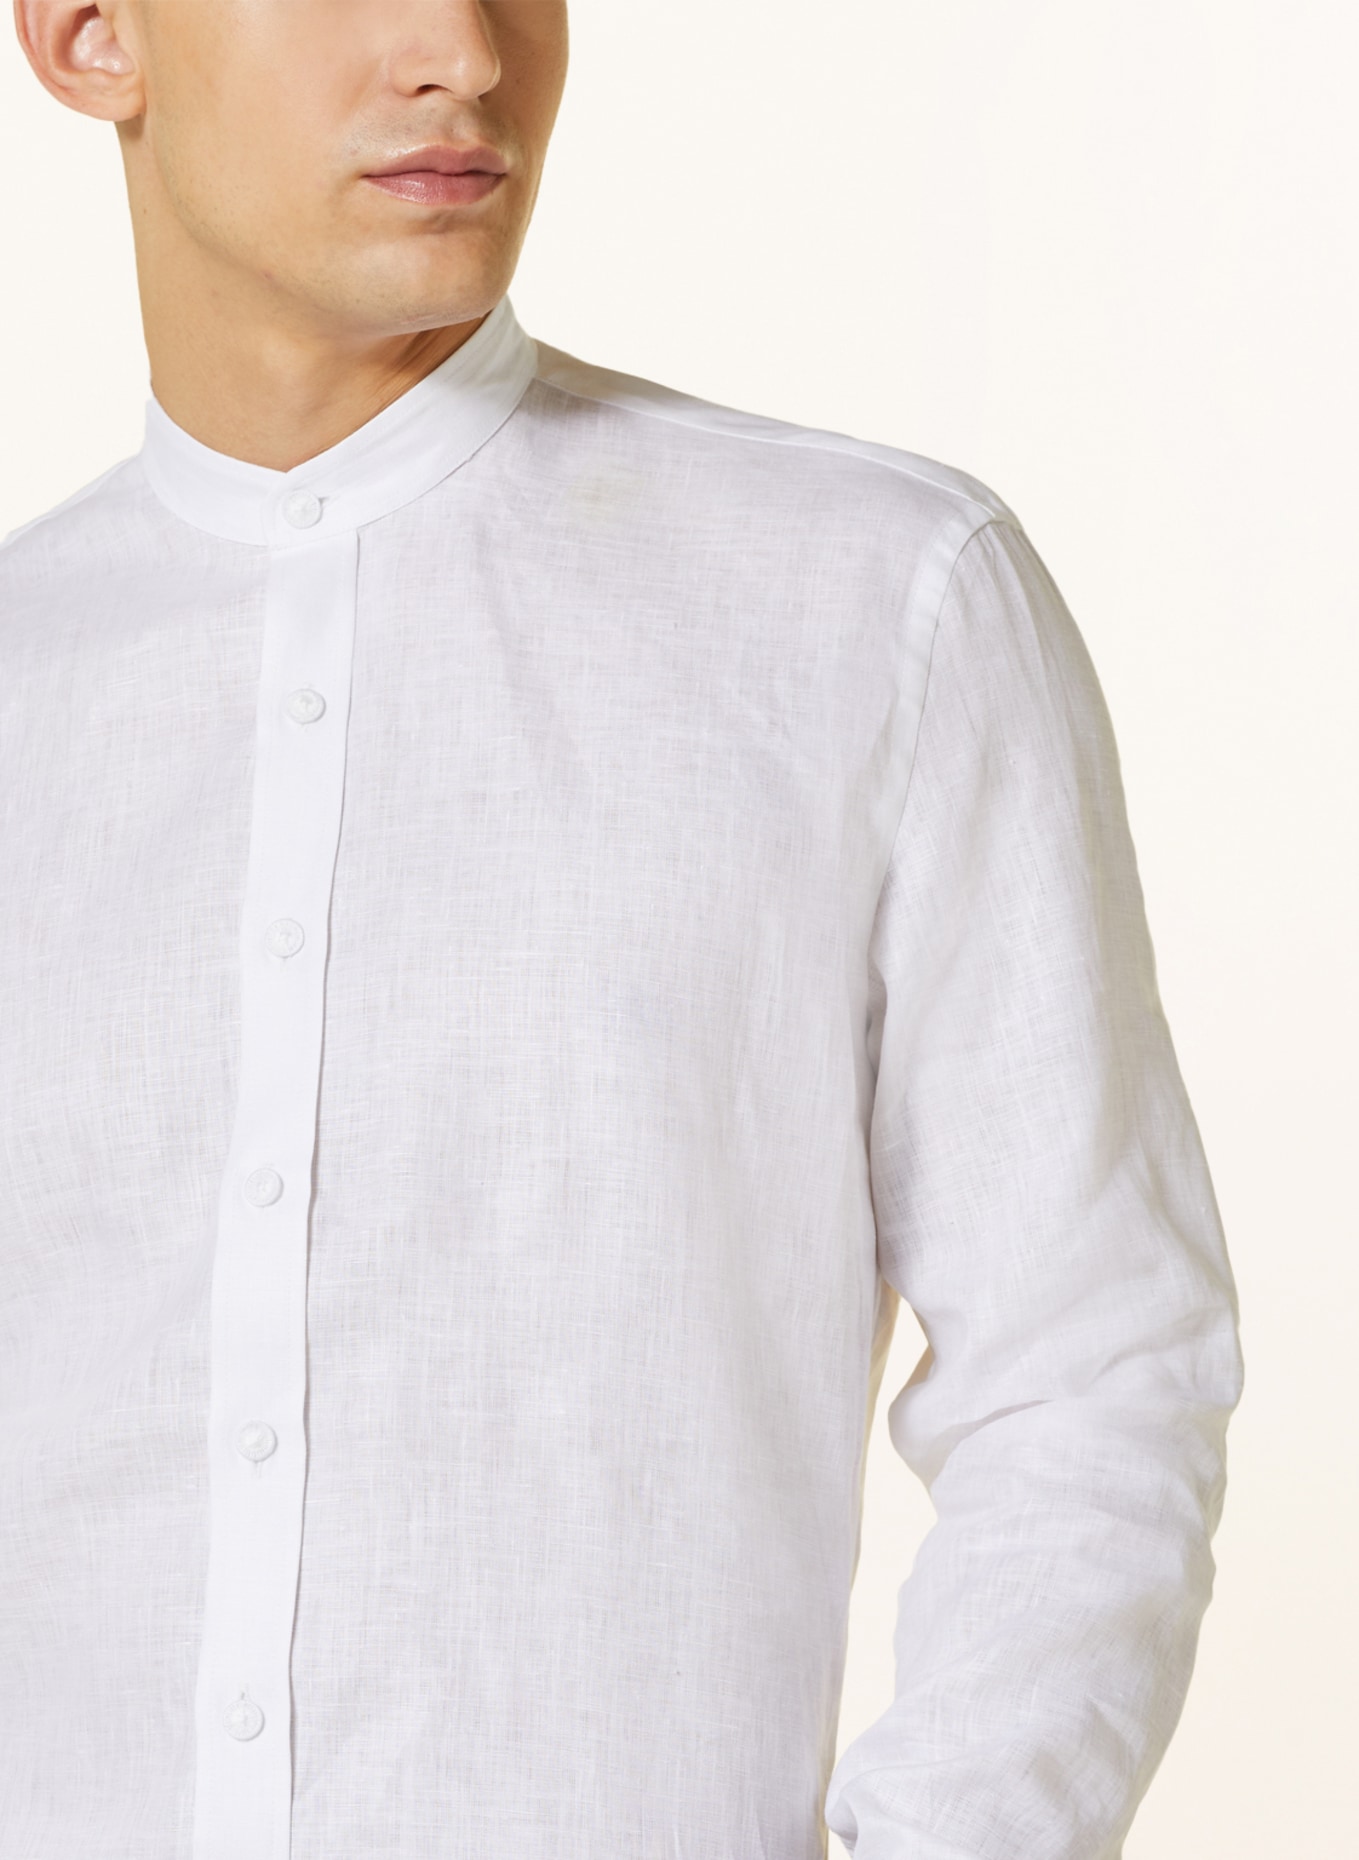 arido Trachten shirt regular fit with stand-up collar, Color: WHITE (Image 4)